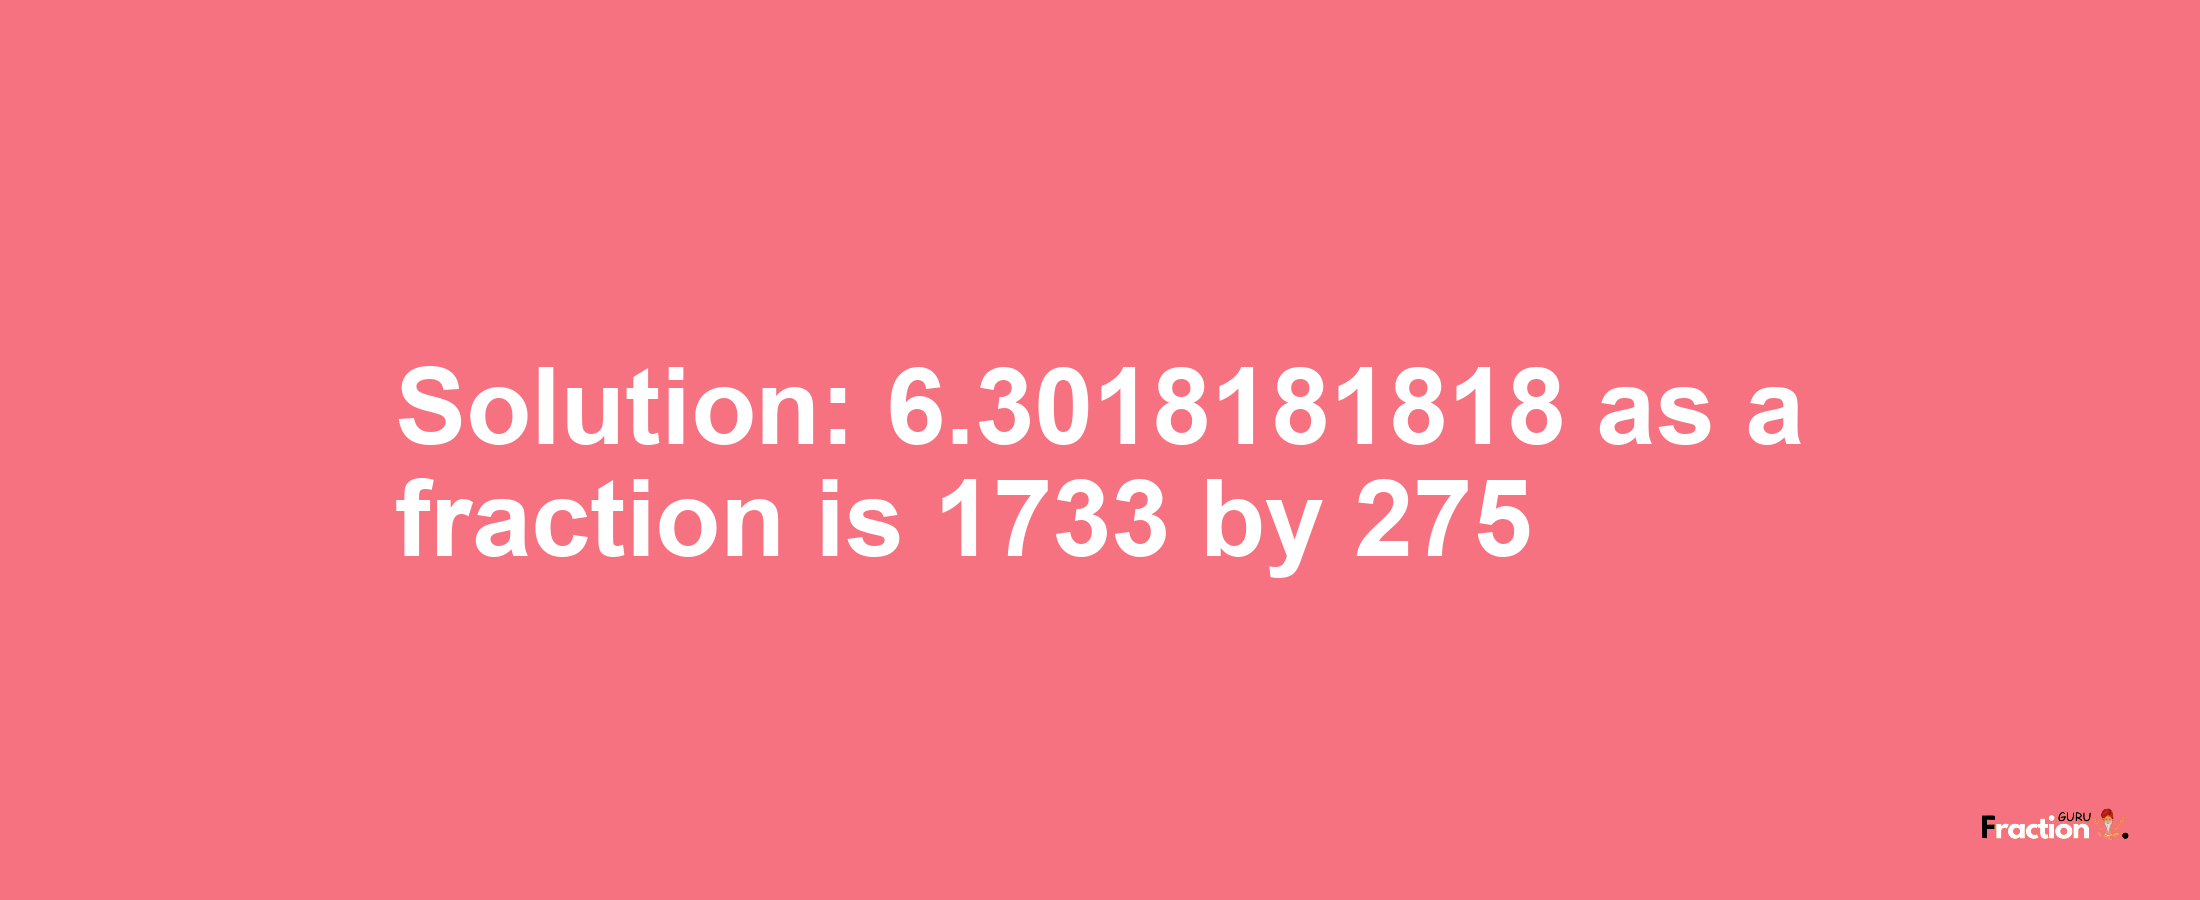 Solution:6.3018181818 as a fraction is 1733/275